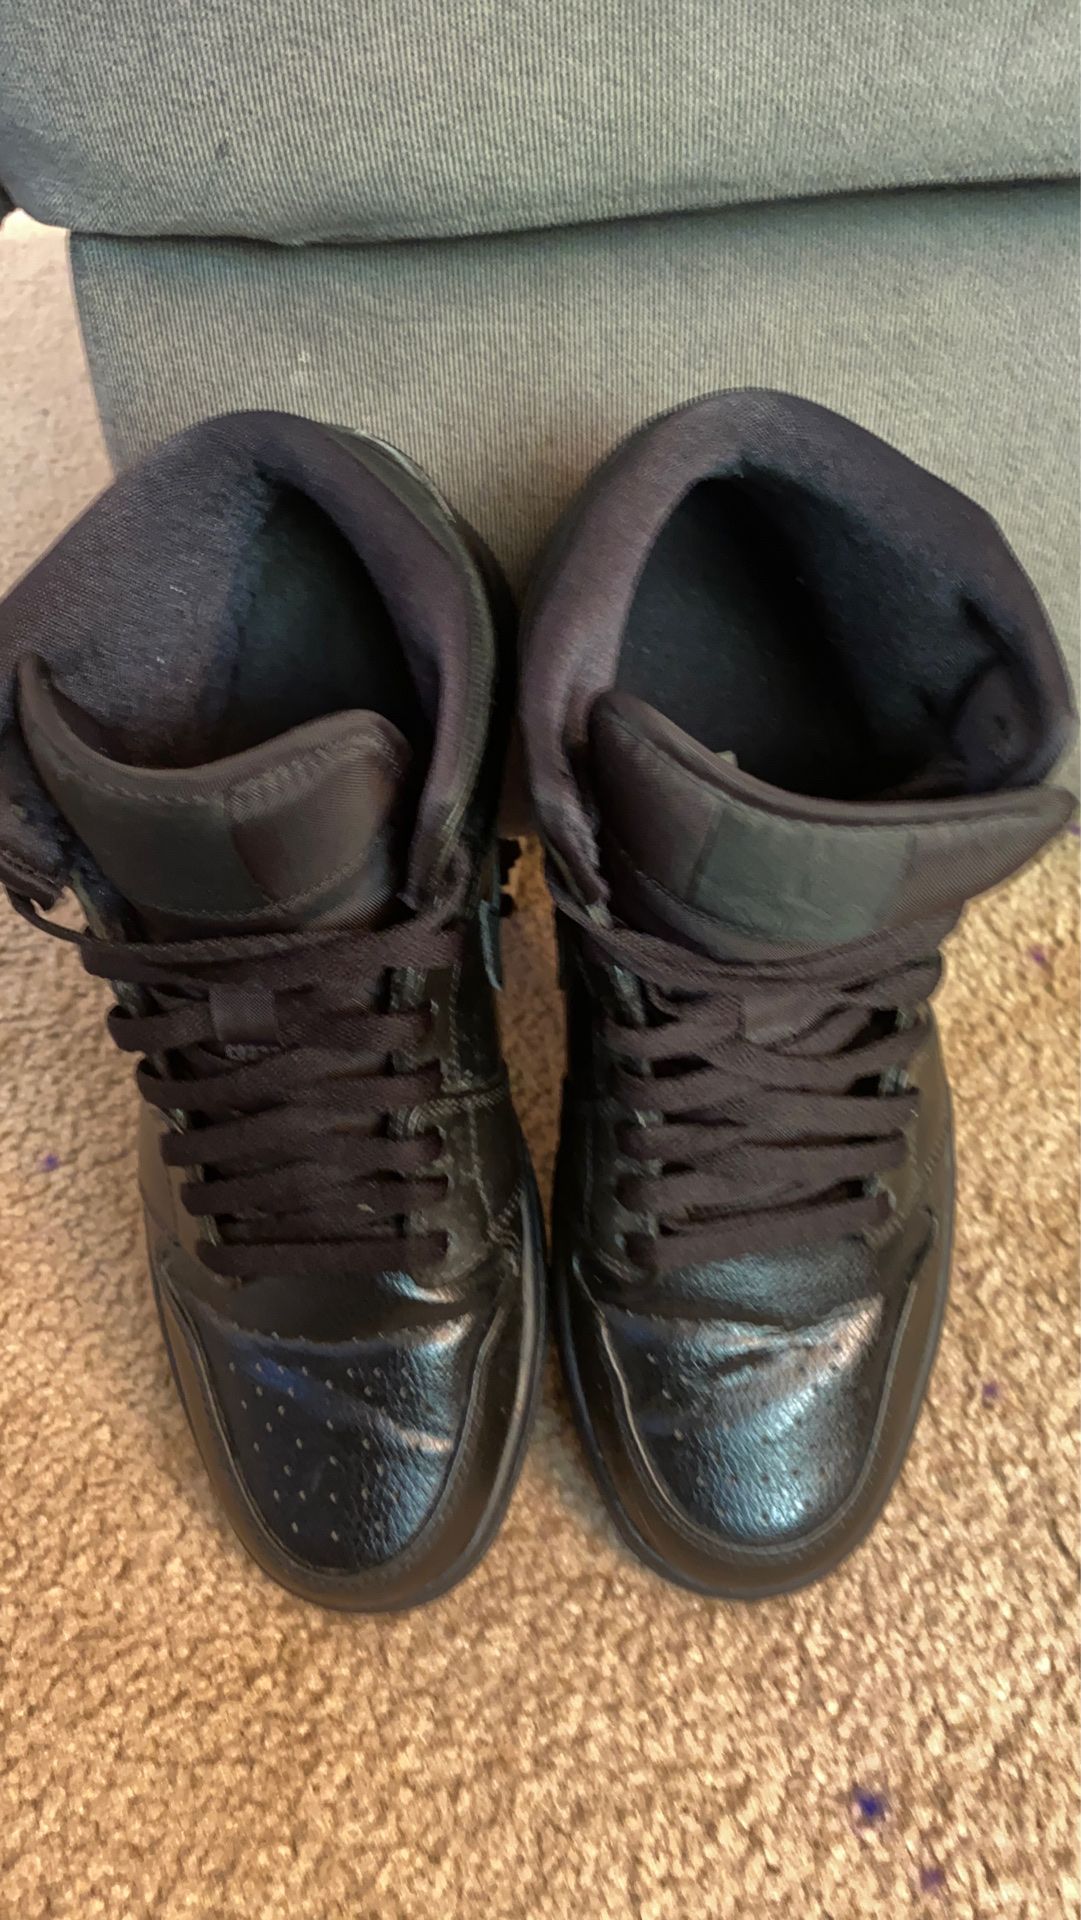 Jordan 1 all black very clean and lightly used size 9.5 men OBO